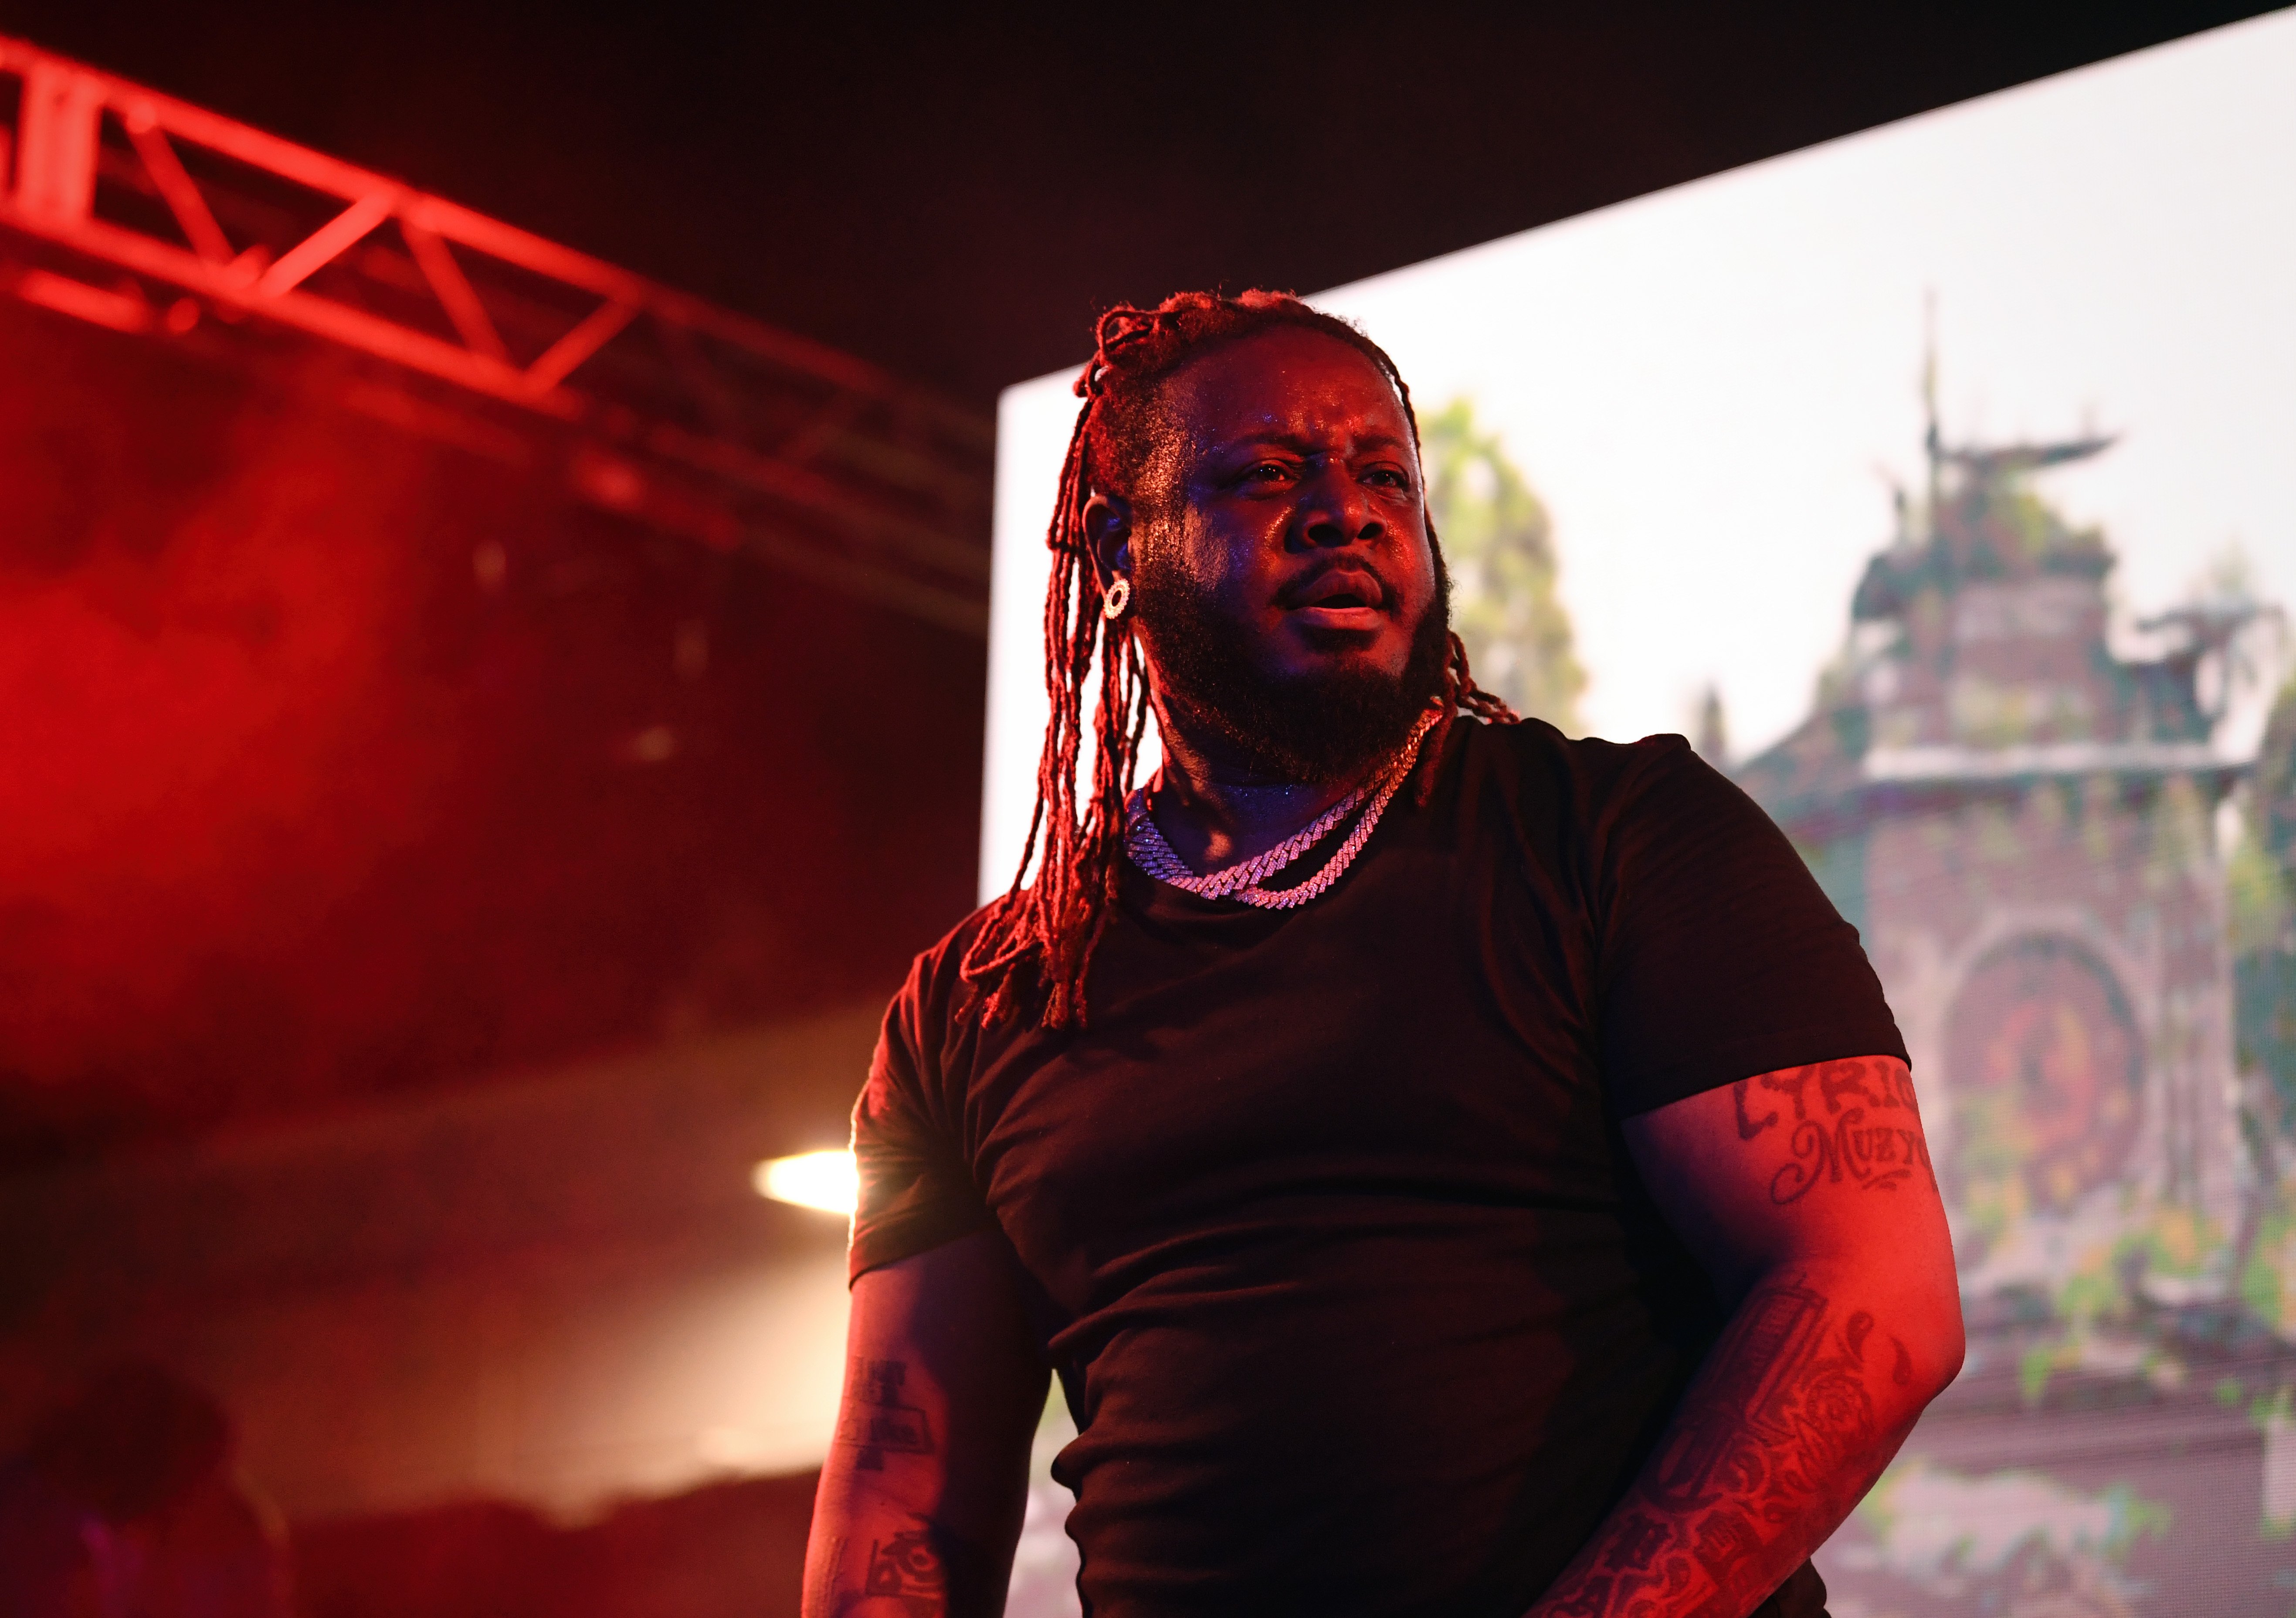 T-Pain on stage.